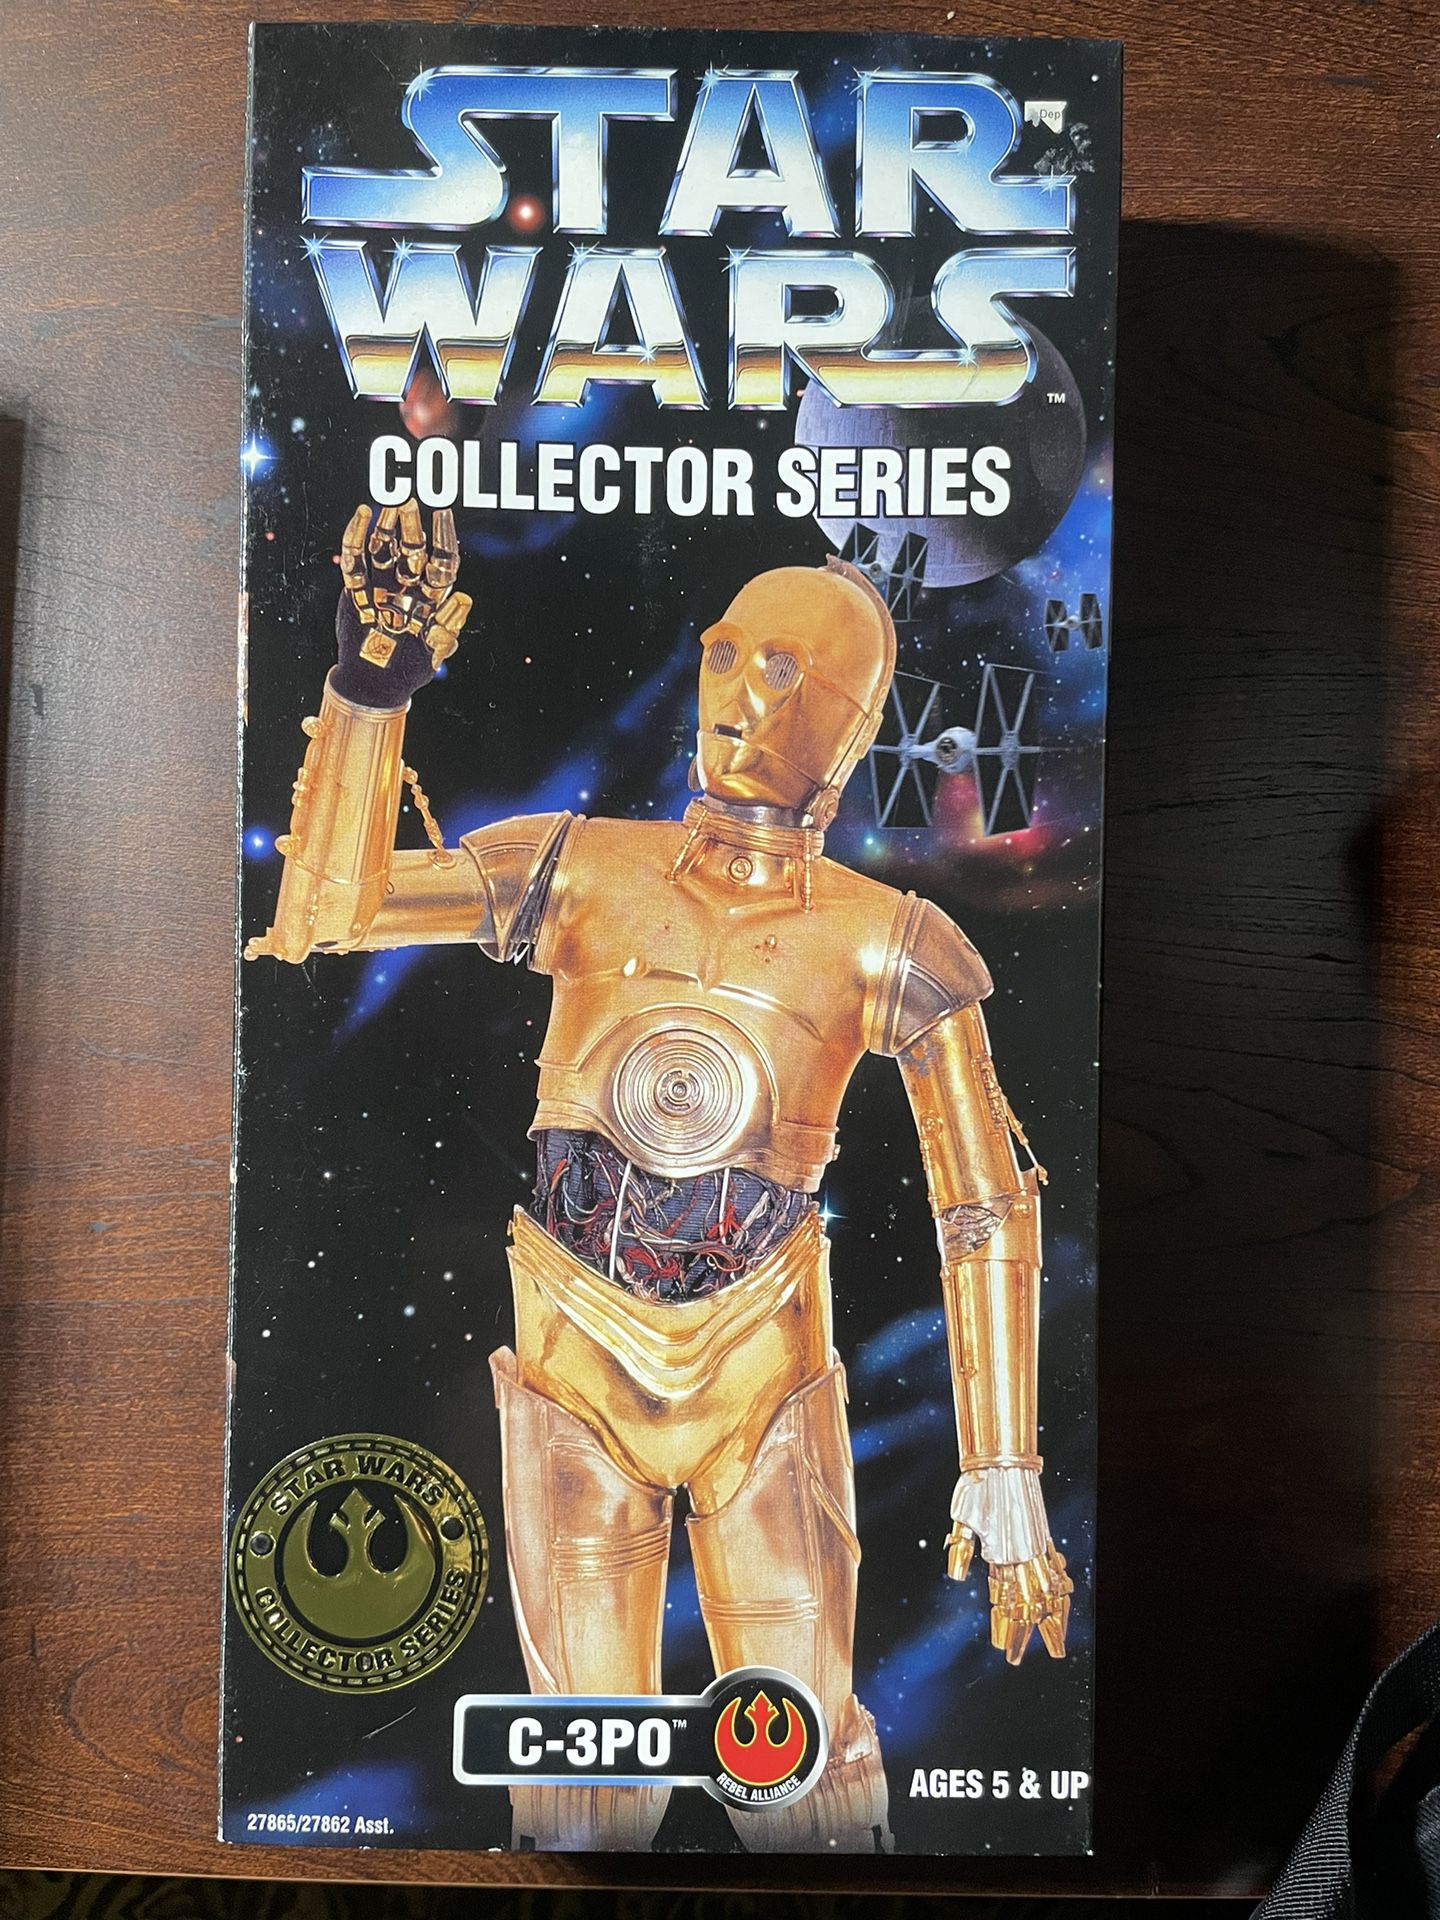 Star Wars C-3PO 12” Collector Series Action Figure